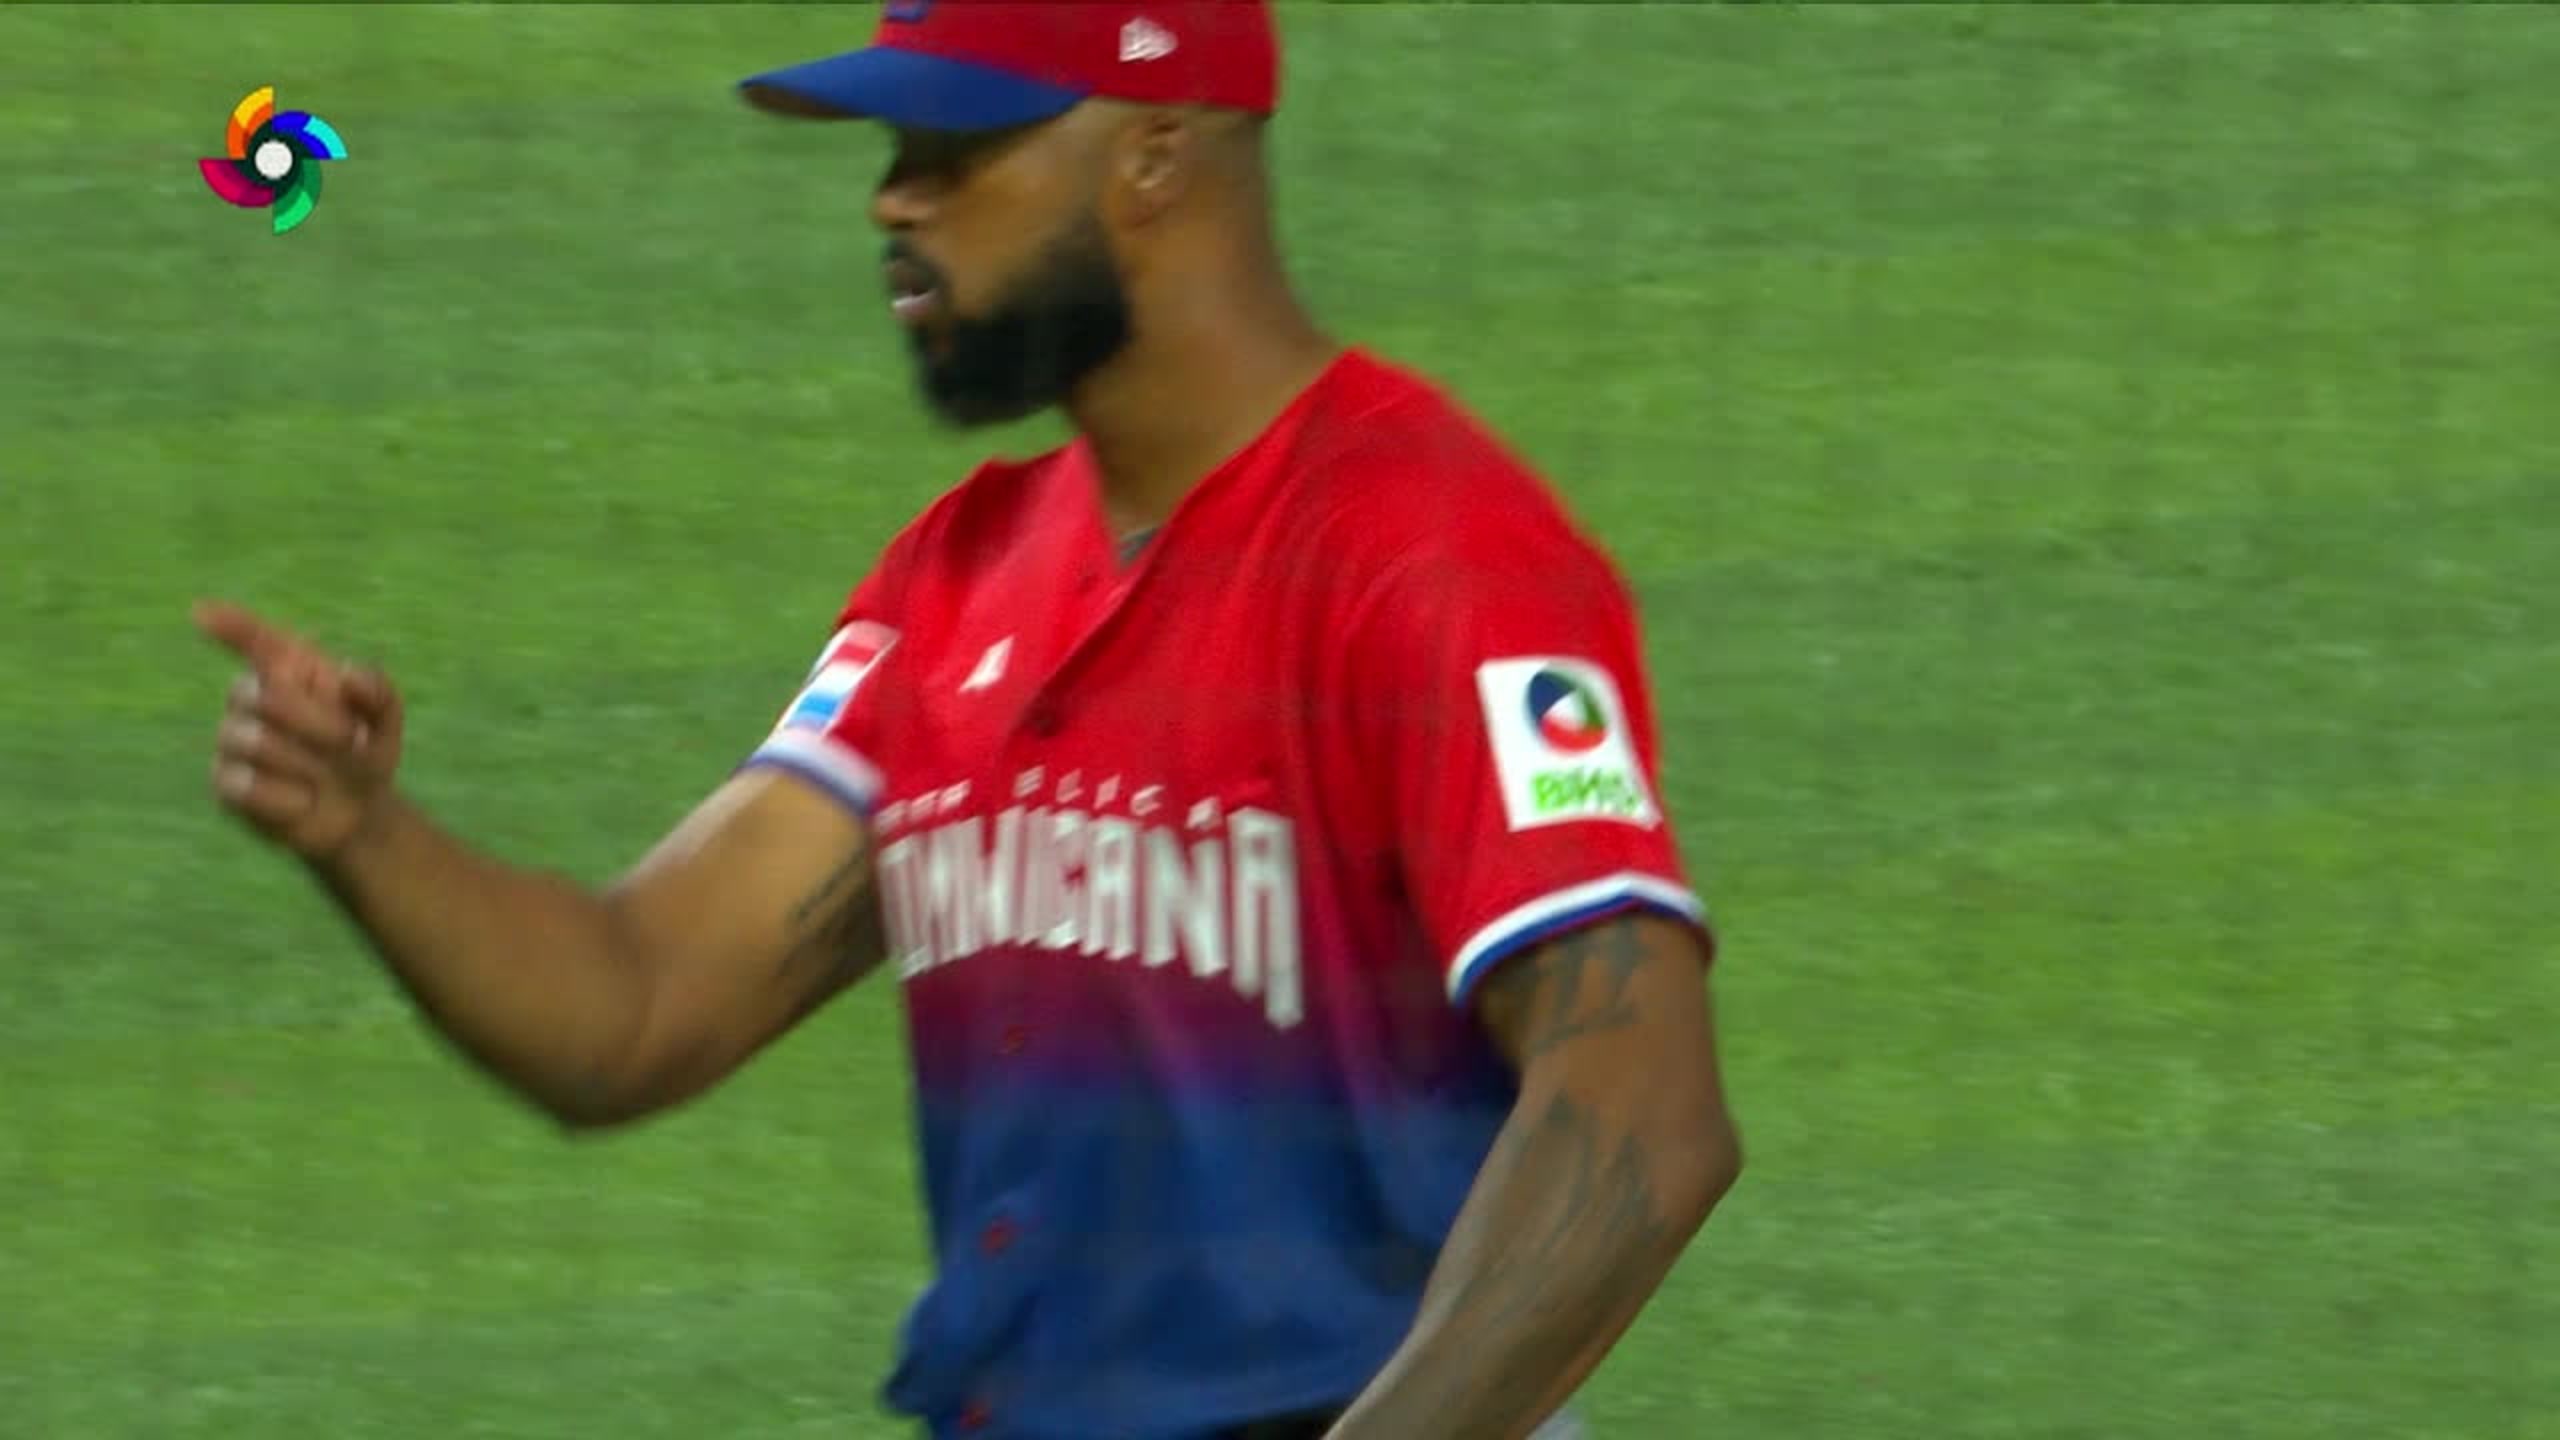 Dominicans win gold and bring joy to the World (Baseball Classic